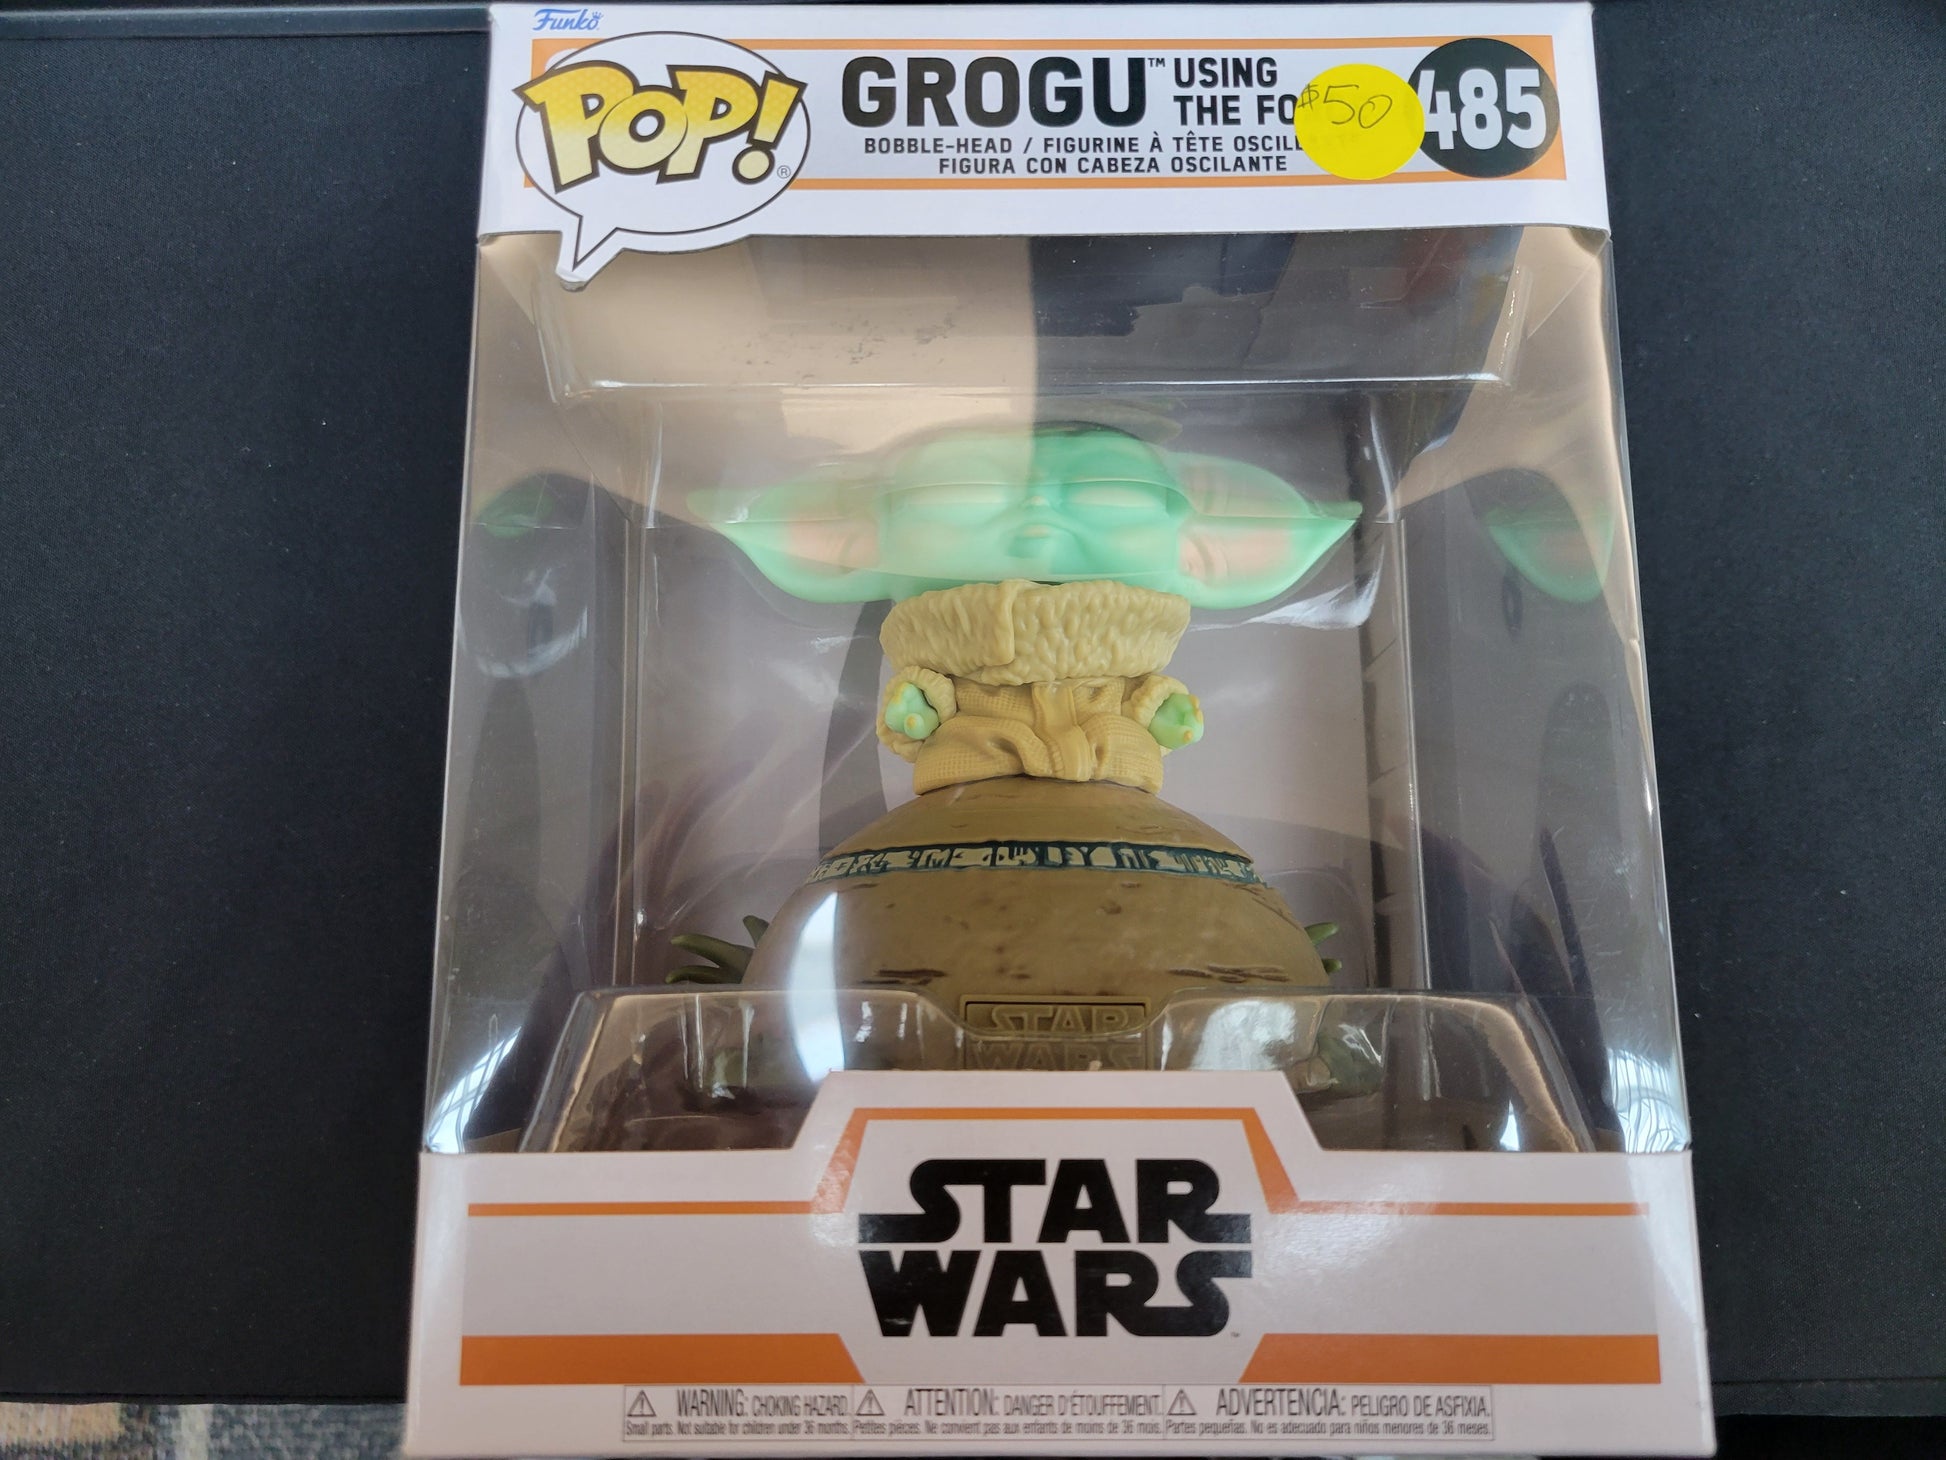 Celebrate the epic saga of the Mandalorian with a POP figure of the child Grogu.  These figures come complete with their original box and are in the likeness of your favorite character! Place them in your office, bedroom, or wherever you want to display your allegiance!  Vinyl bobblehead is approximately 4.25-inches tall, or 4.15-inches tall.